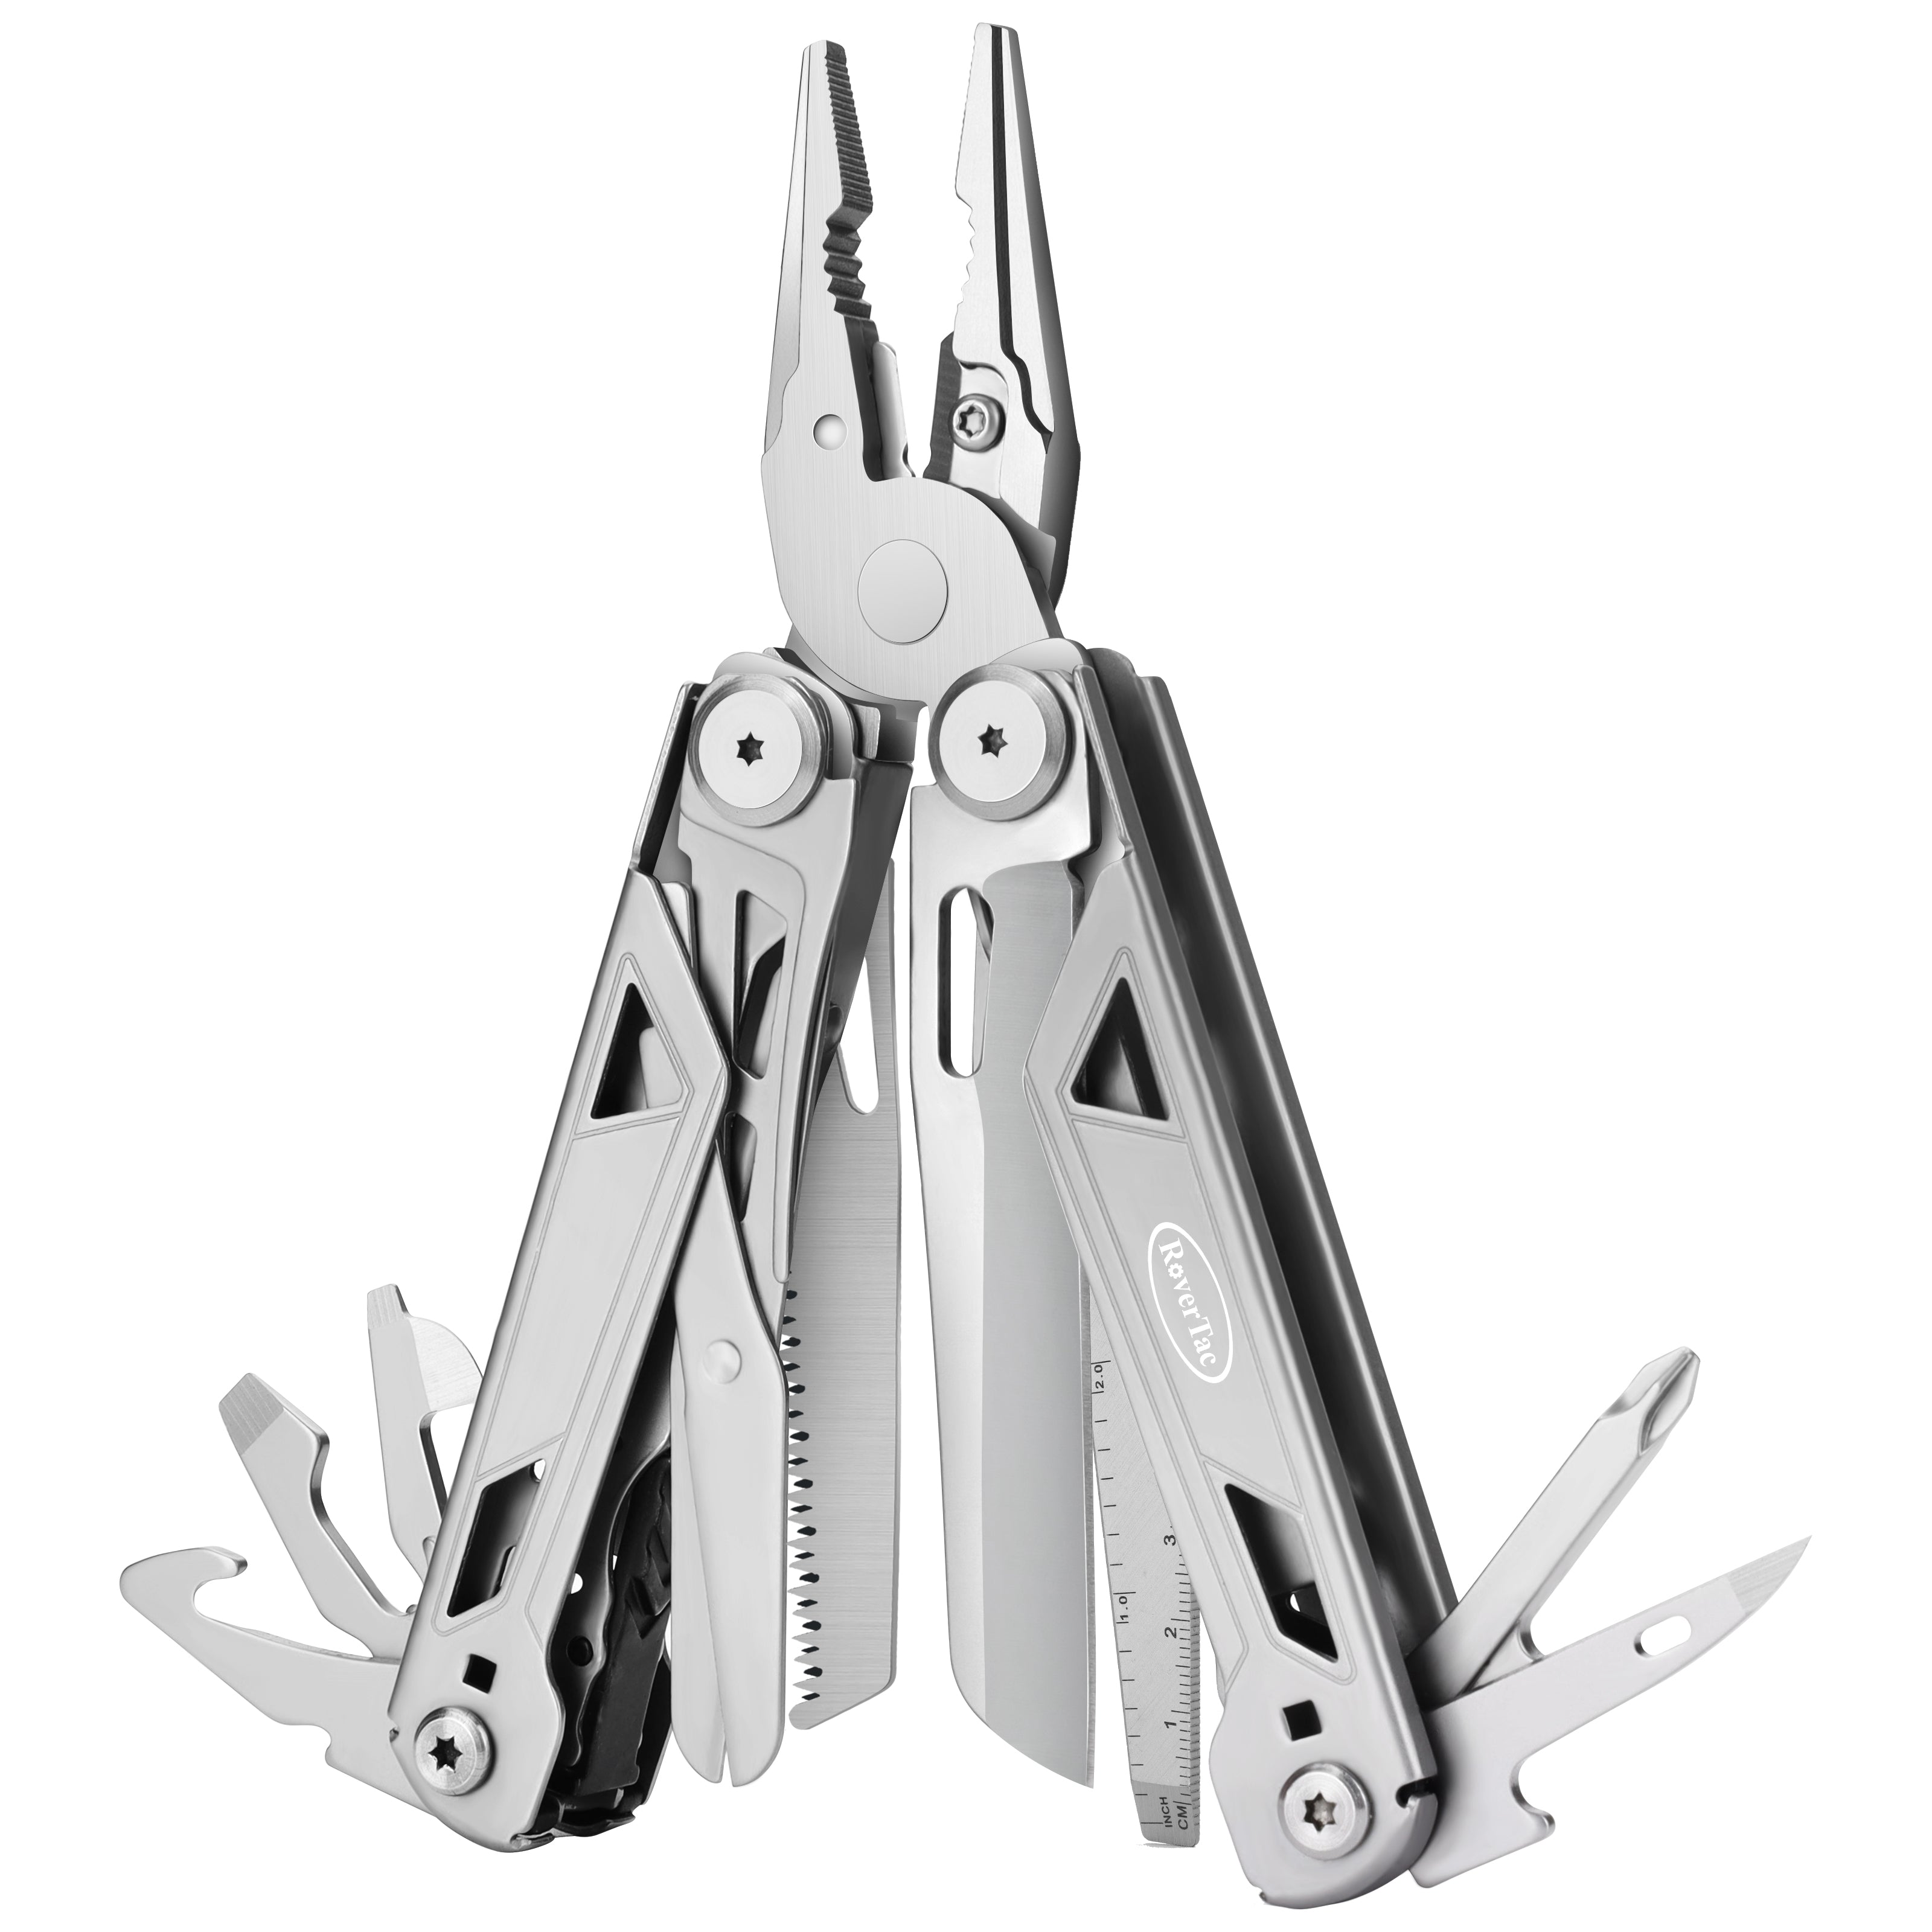 RoverTac Multi Tool Pocket Knife  Tactical Camping Survival Knife Gifts for Men Dad Husband 16 in 1  Multitool Pliers Scissors Saw Corkscrew Bottle Opener Screwdrivers